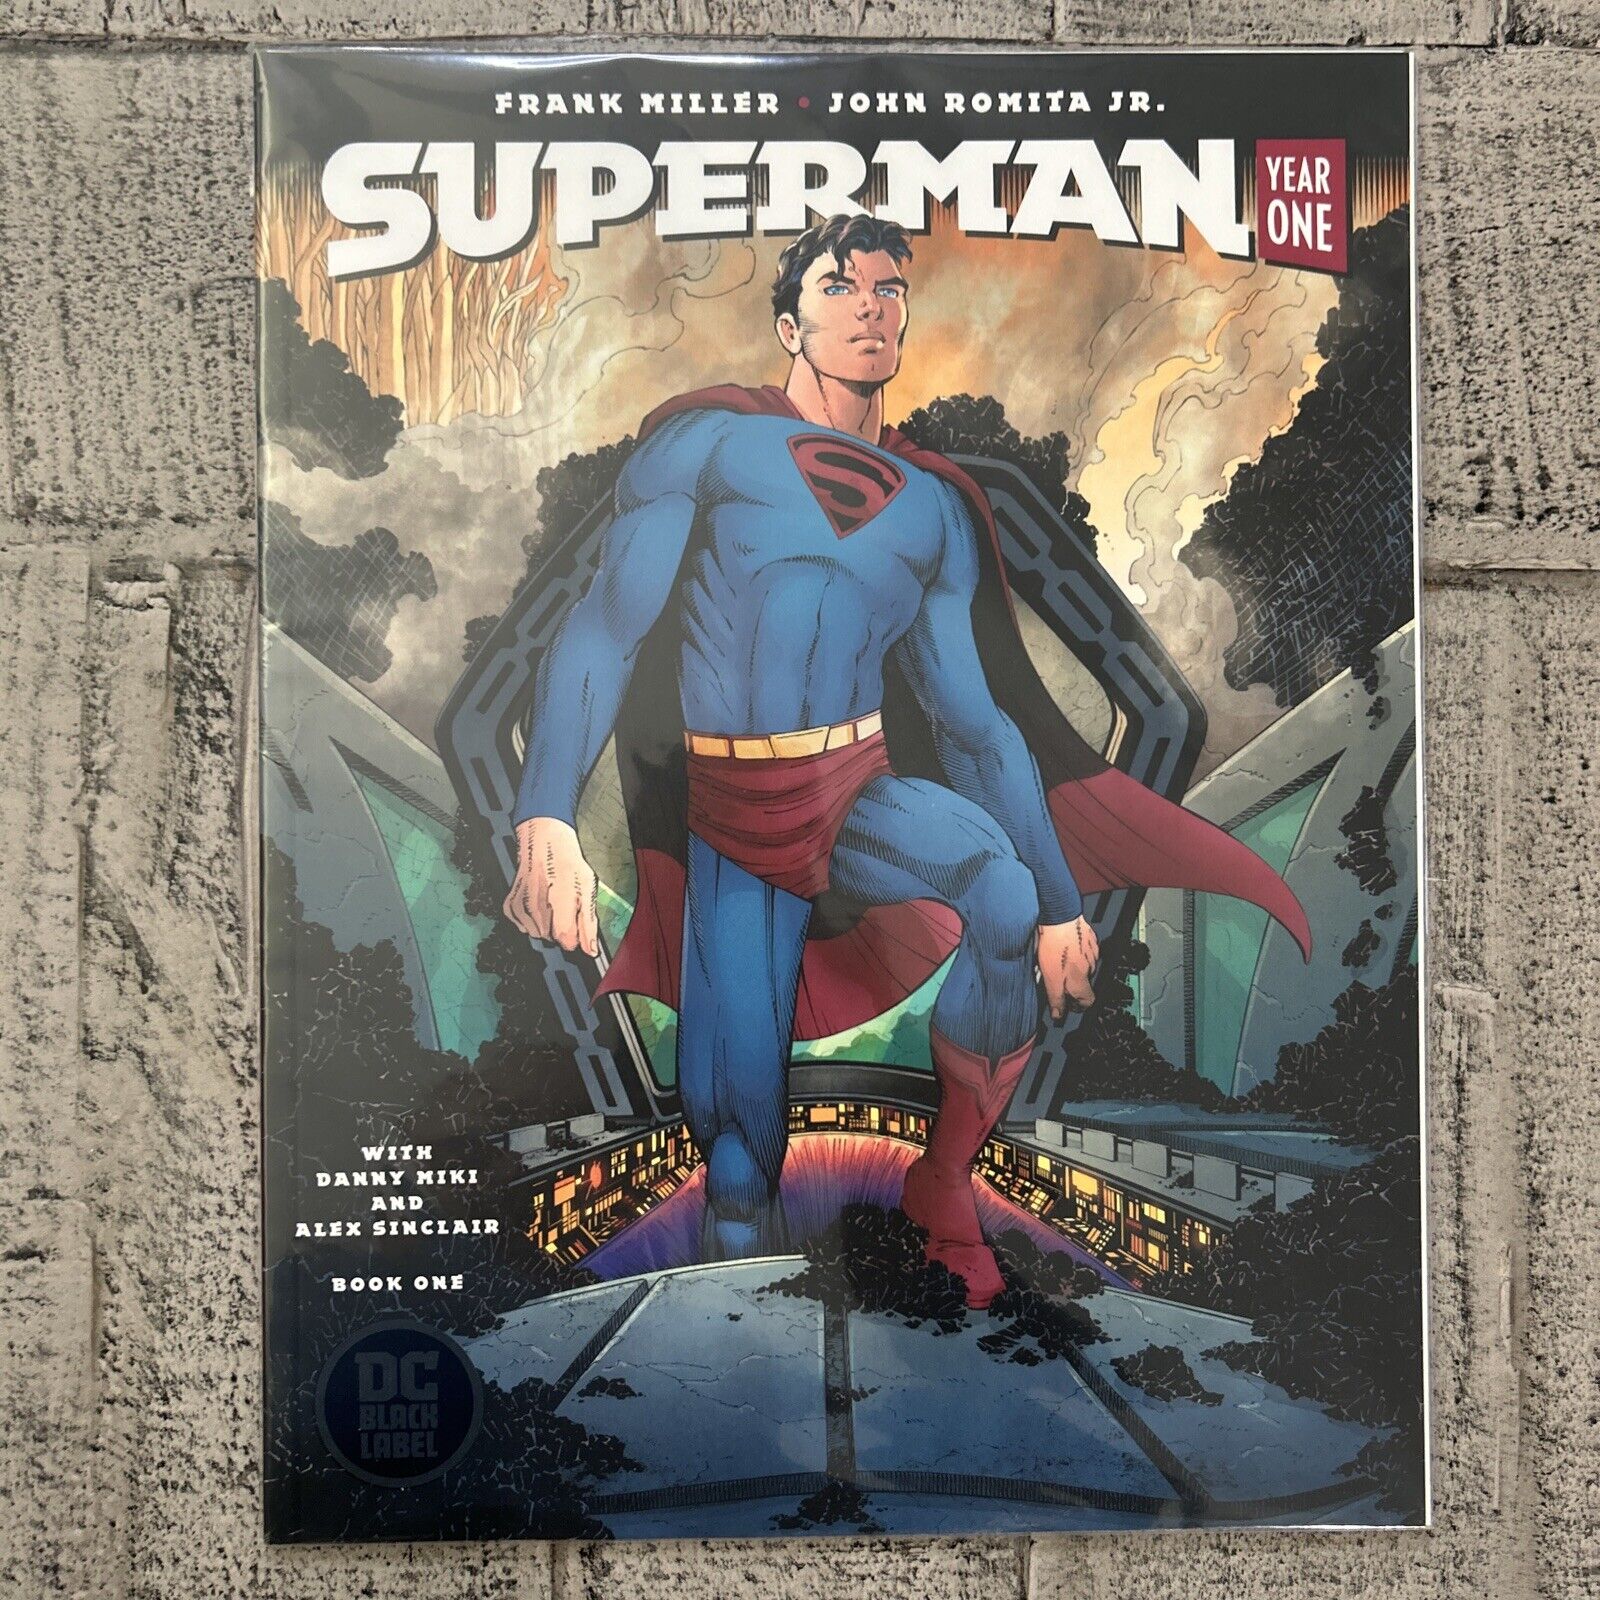 Superman Year One Book 1 Frank Miller (DC Comics, August 2019)